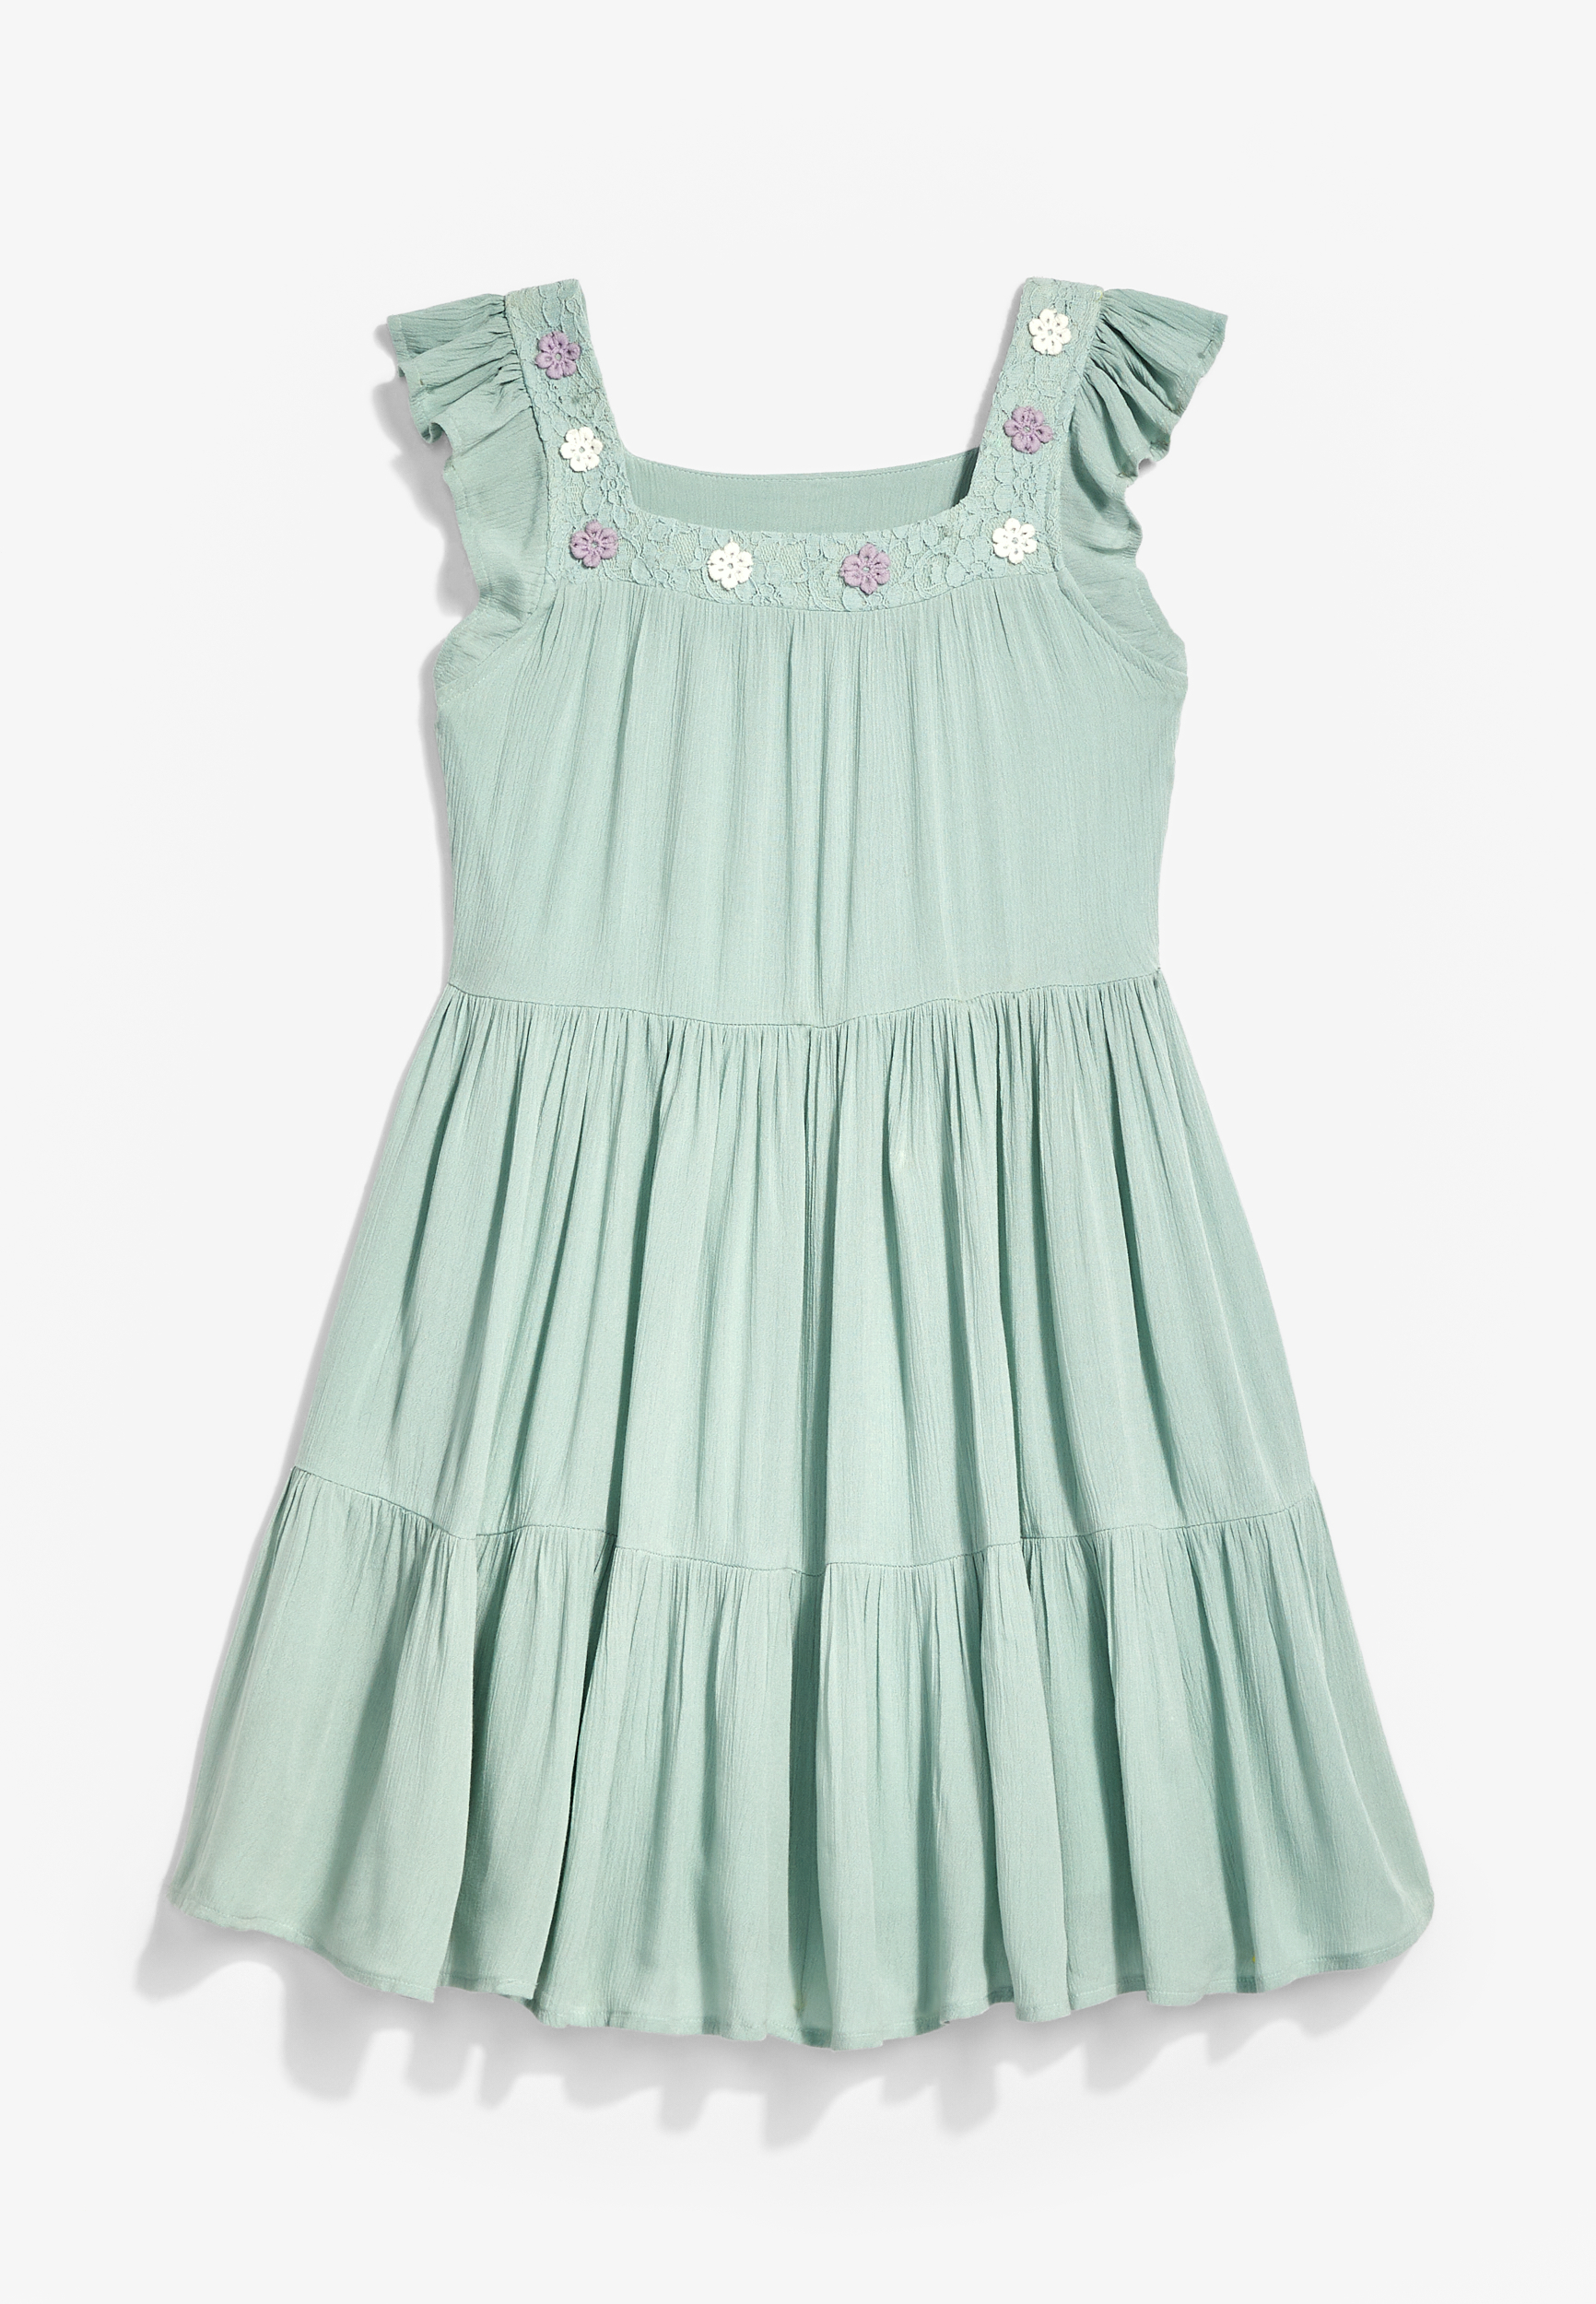 Girls Lace Trim Dress | maurices